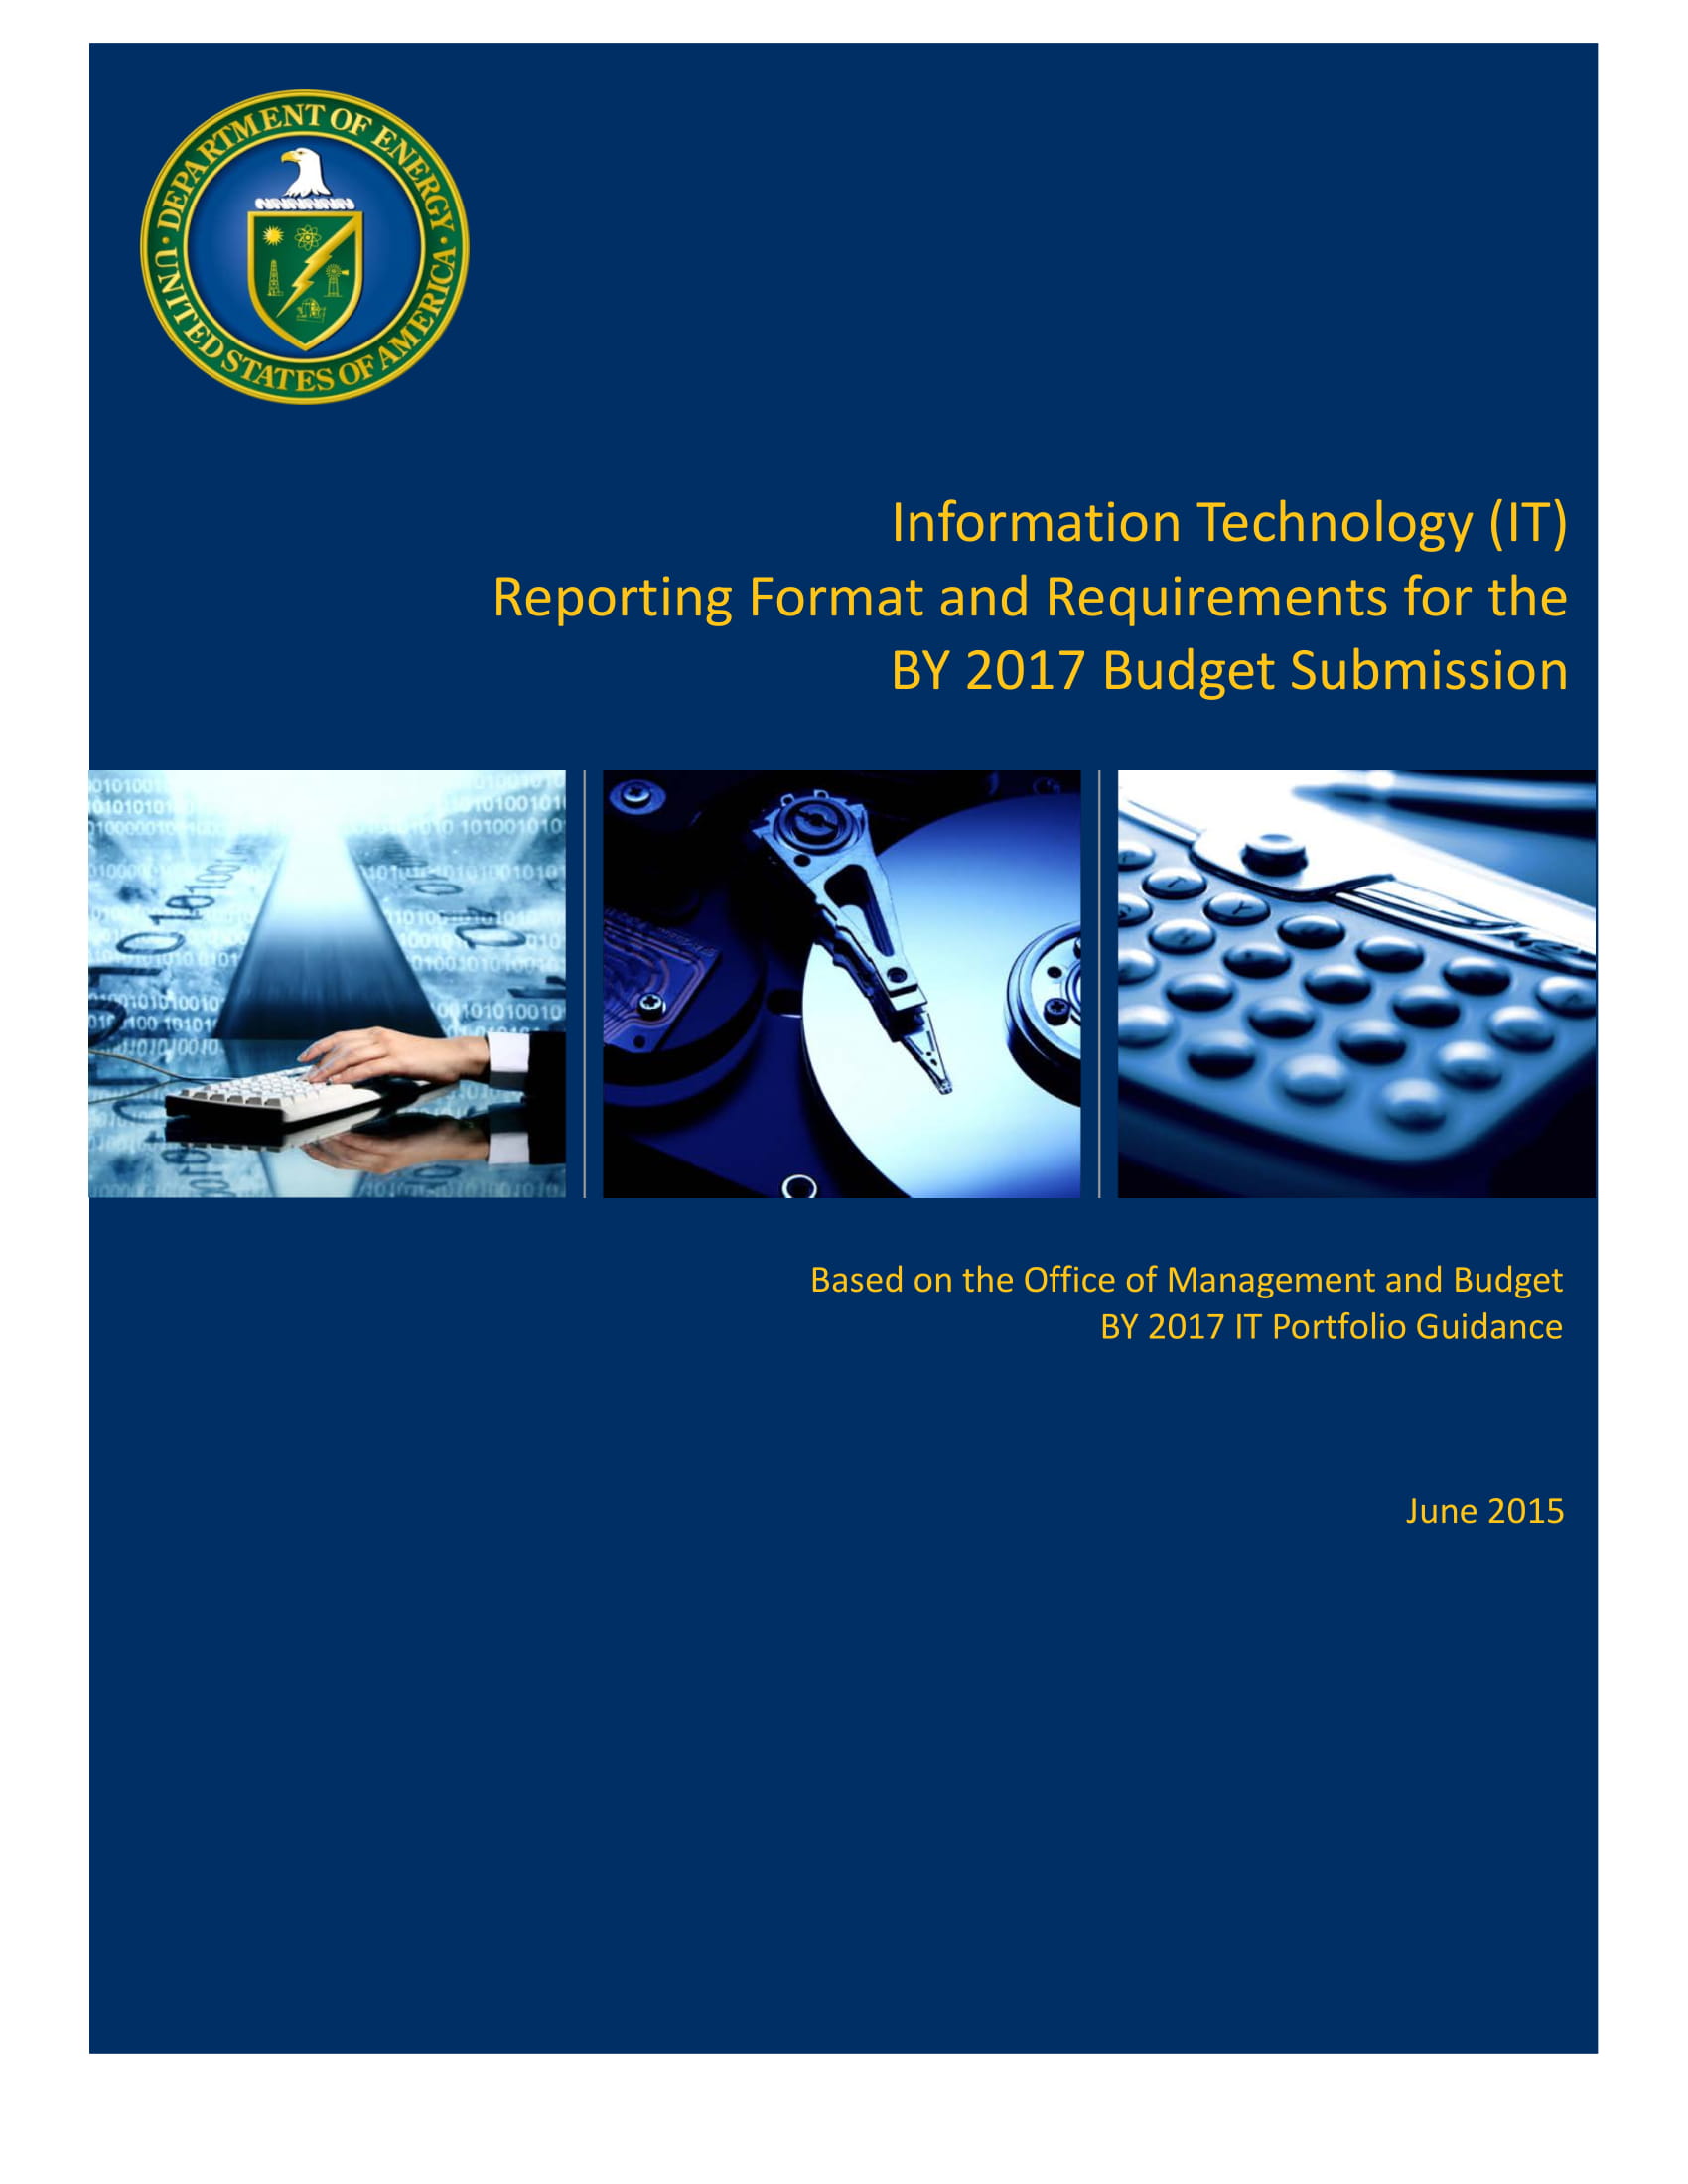 22 IT Management Report Template Examples - PDF  Examples In It Management Report Template